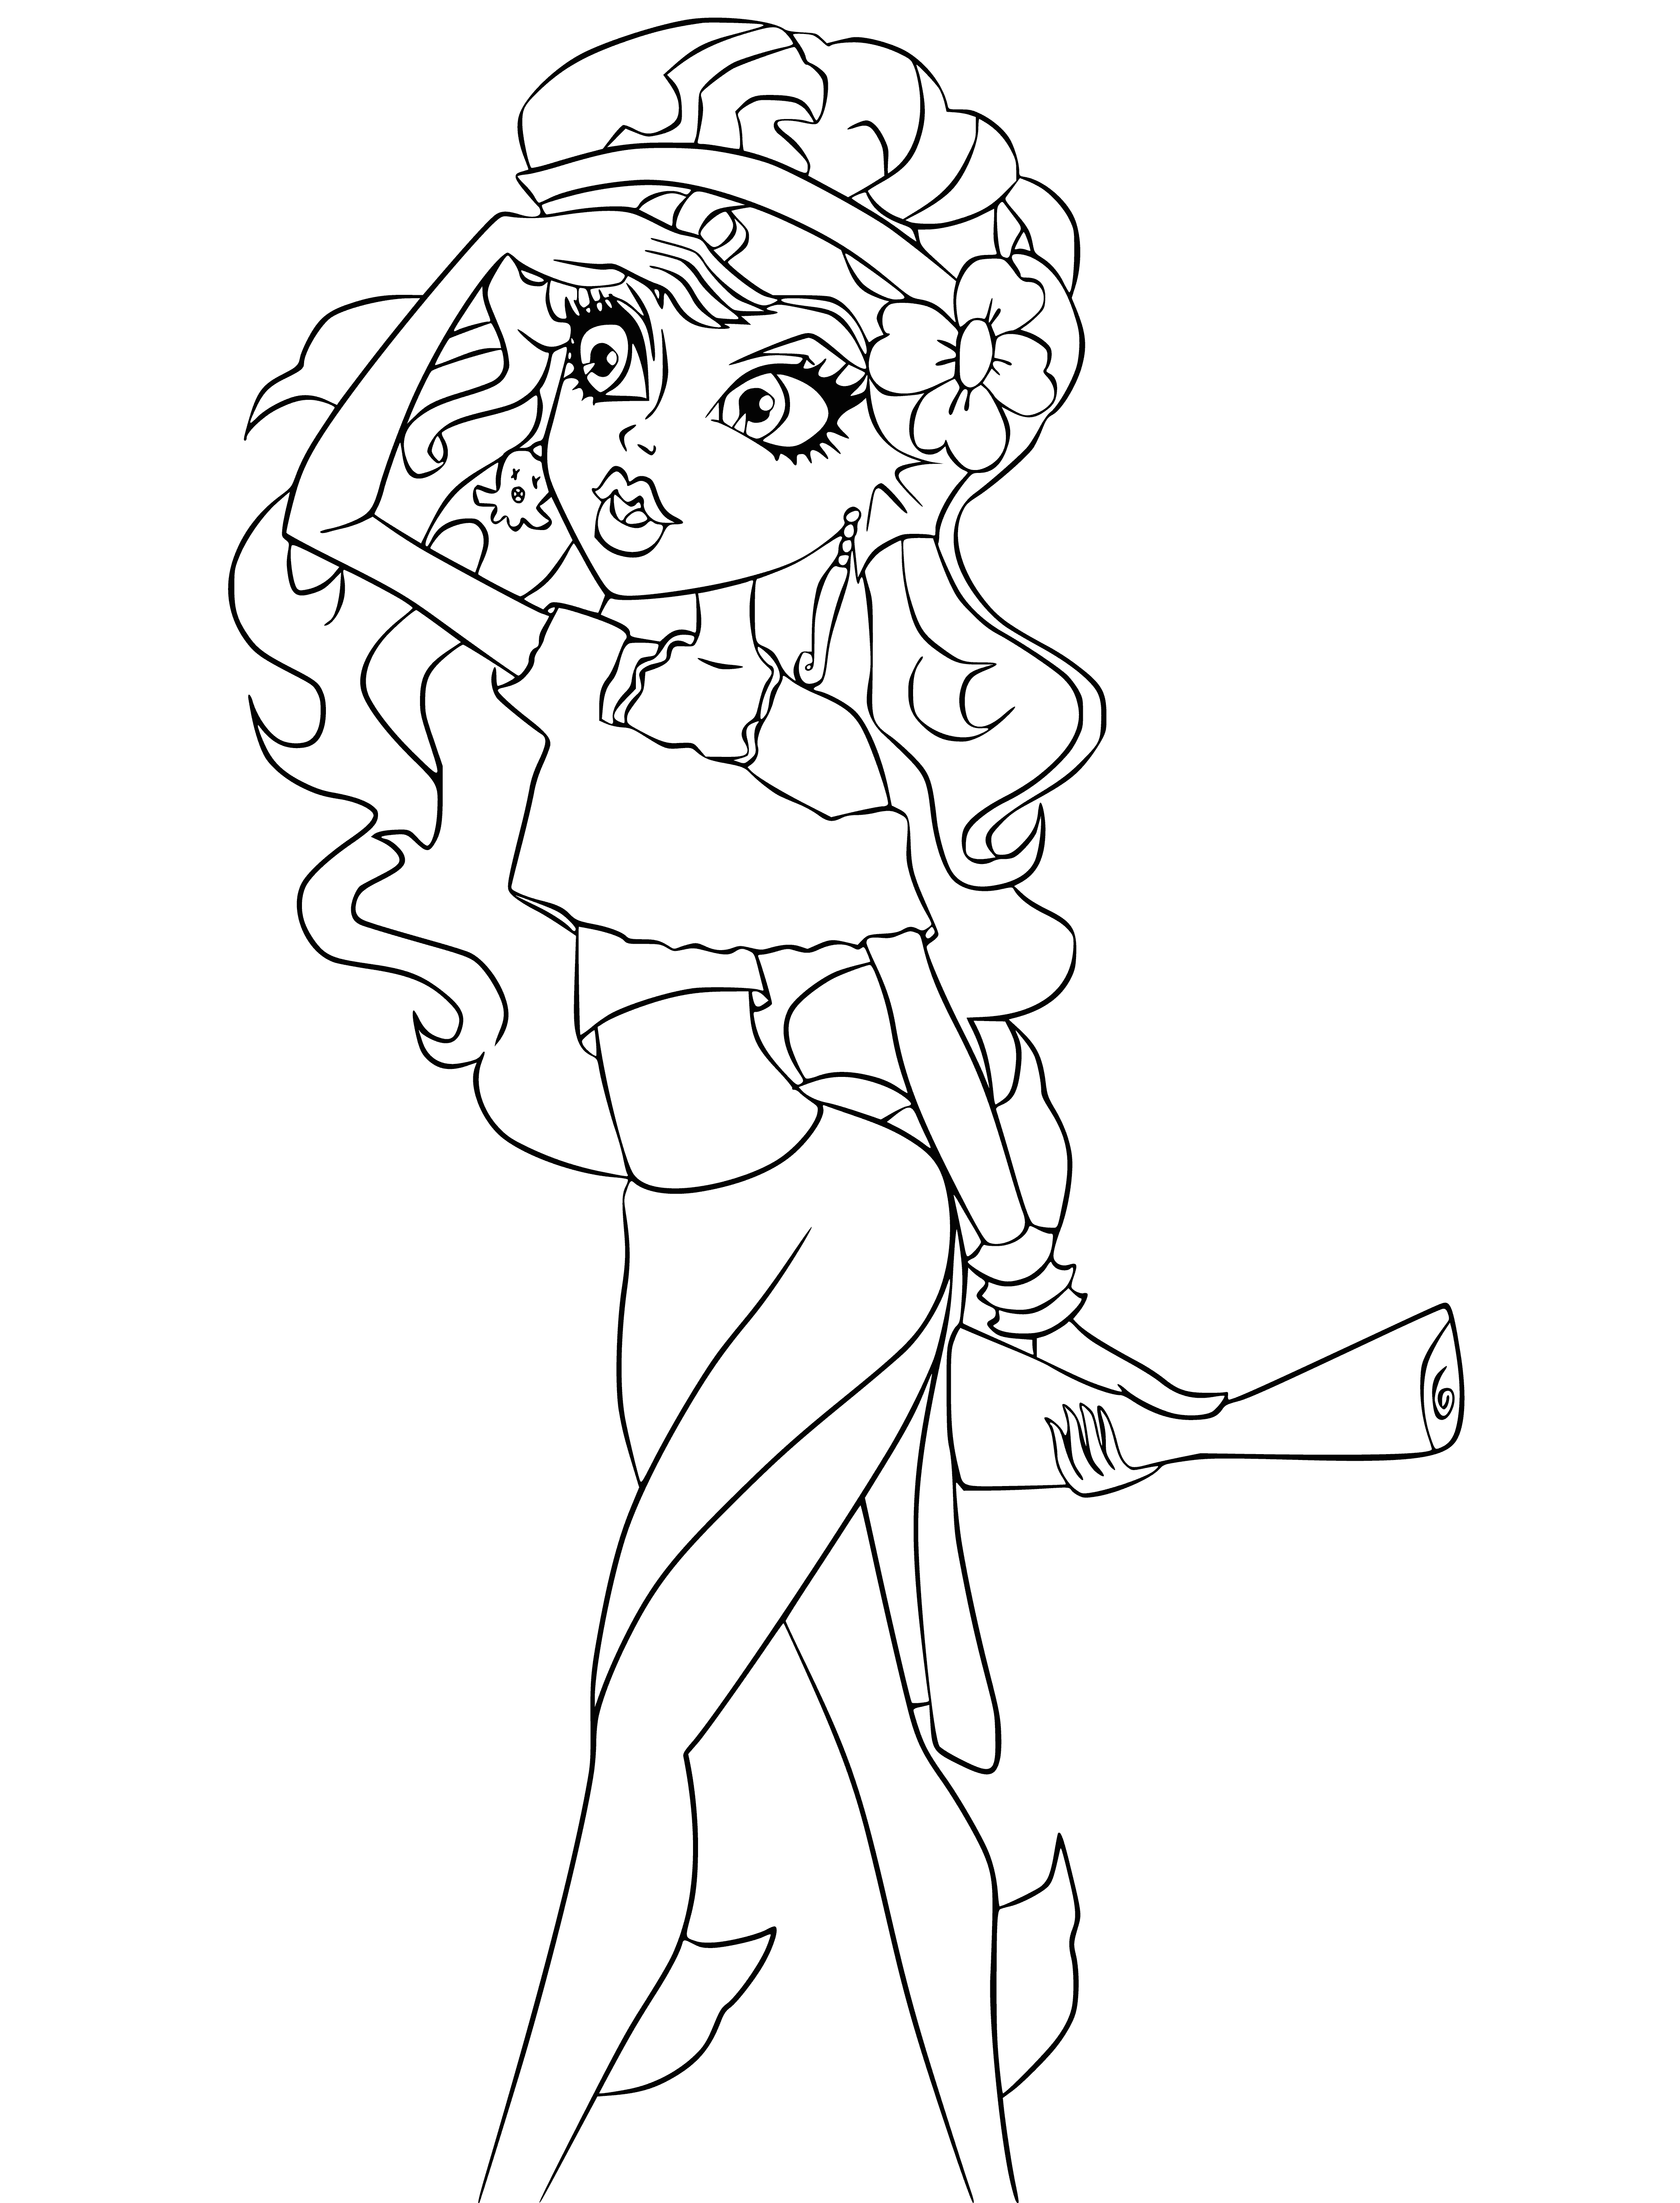 coloring page: Lagoona Blue is lounging in a lagoon with a pink bikini & blue-green skin. A pink & blue fish is nearby.